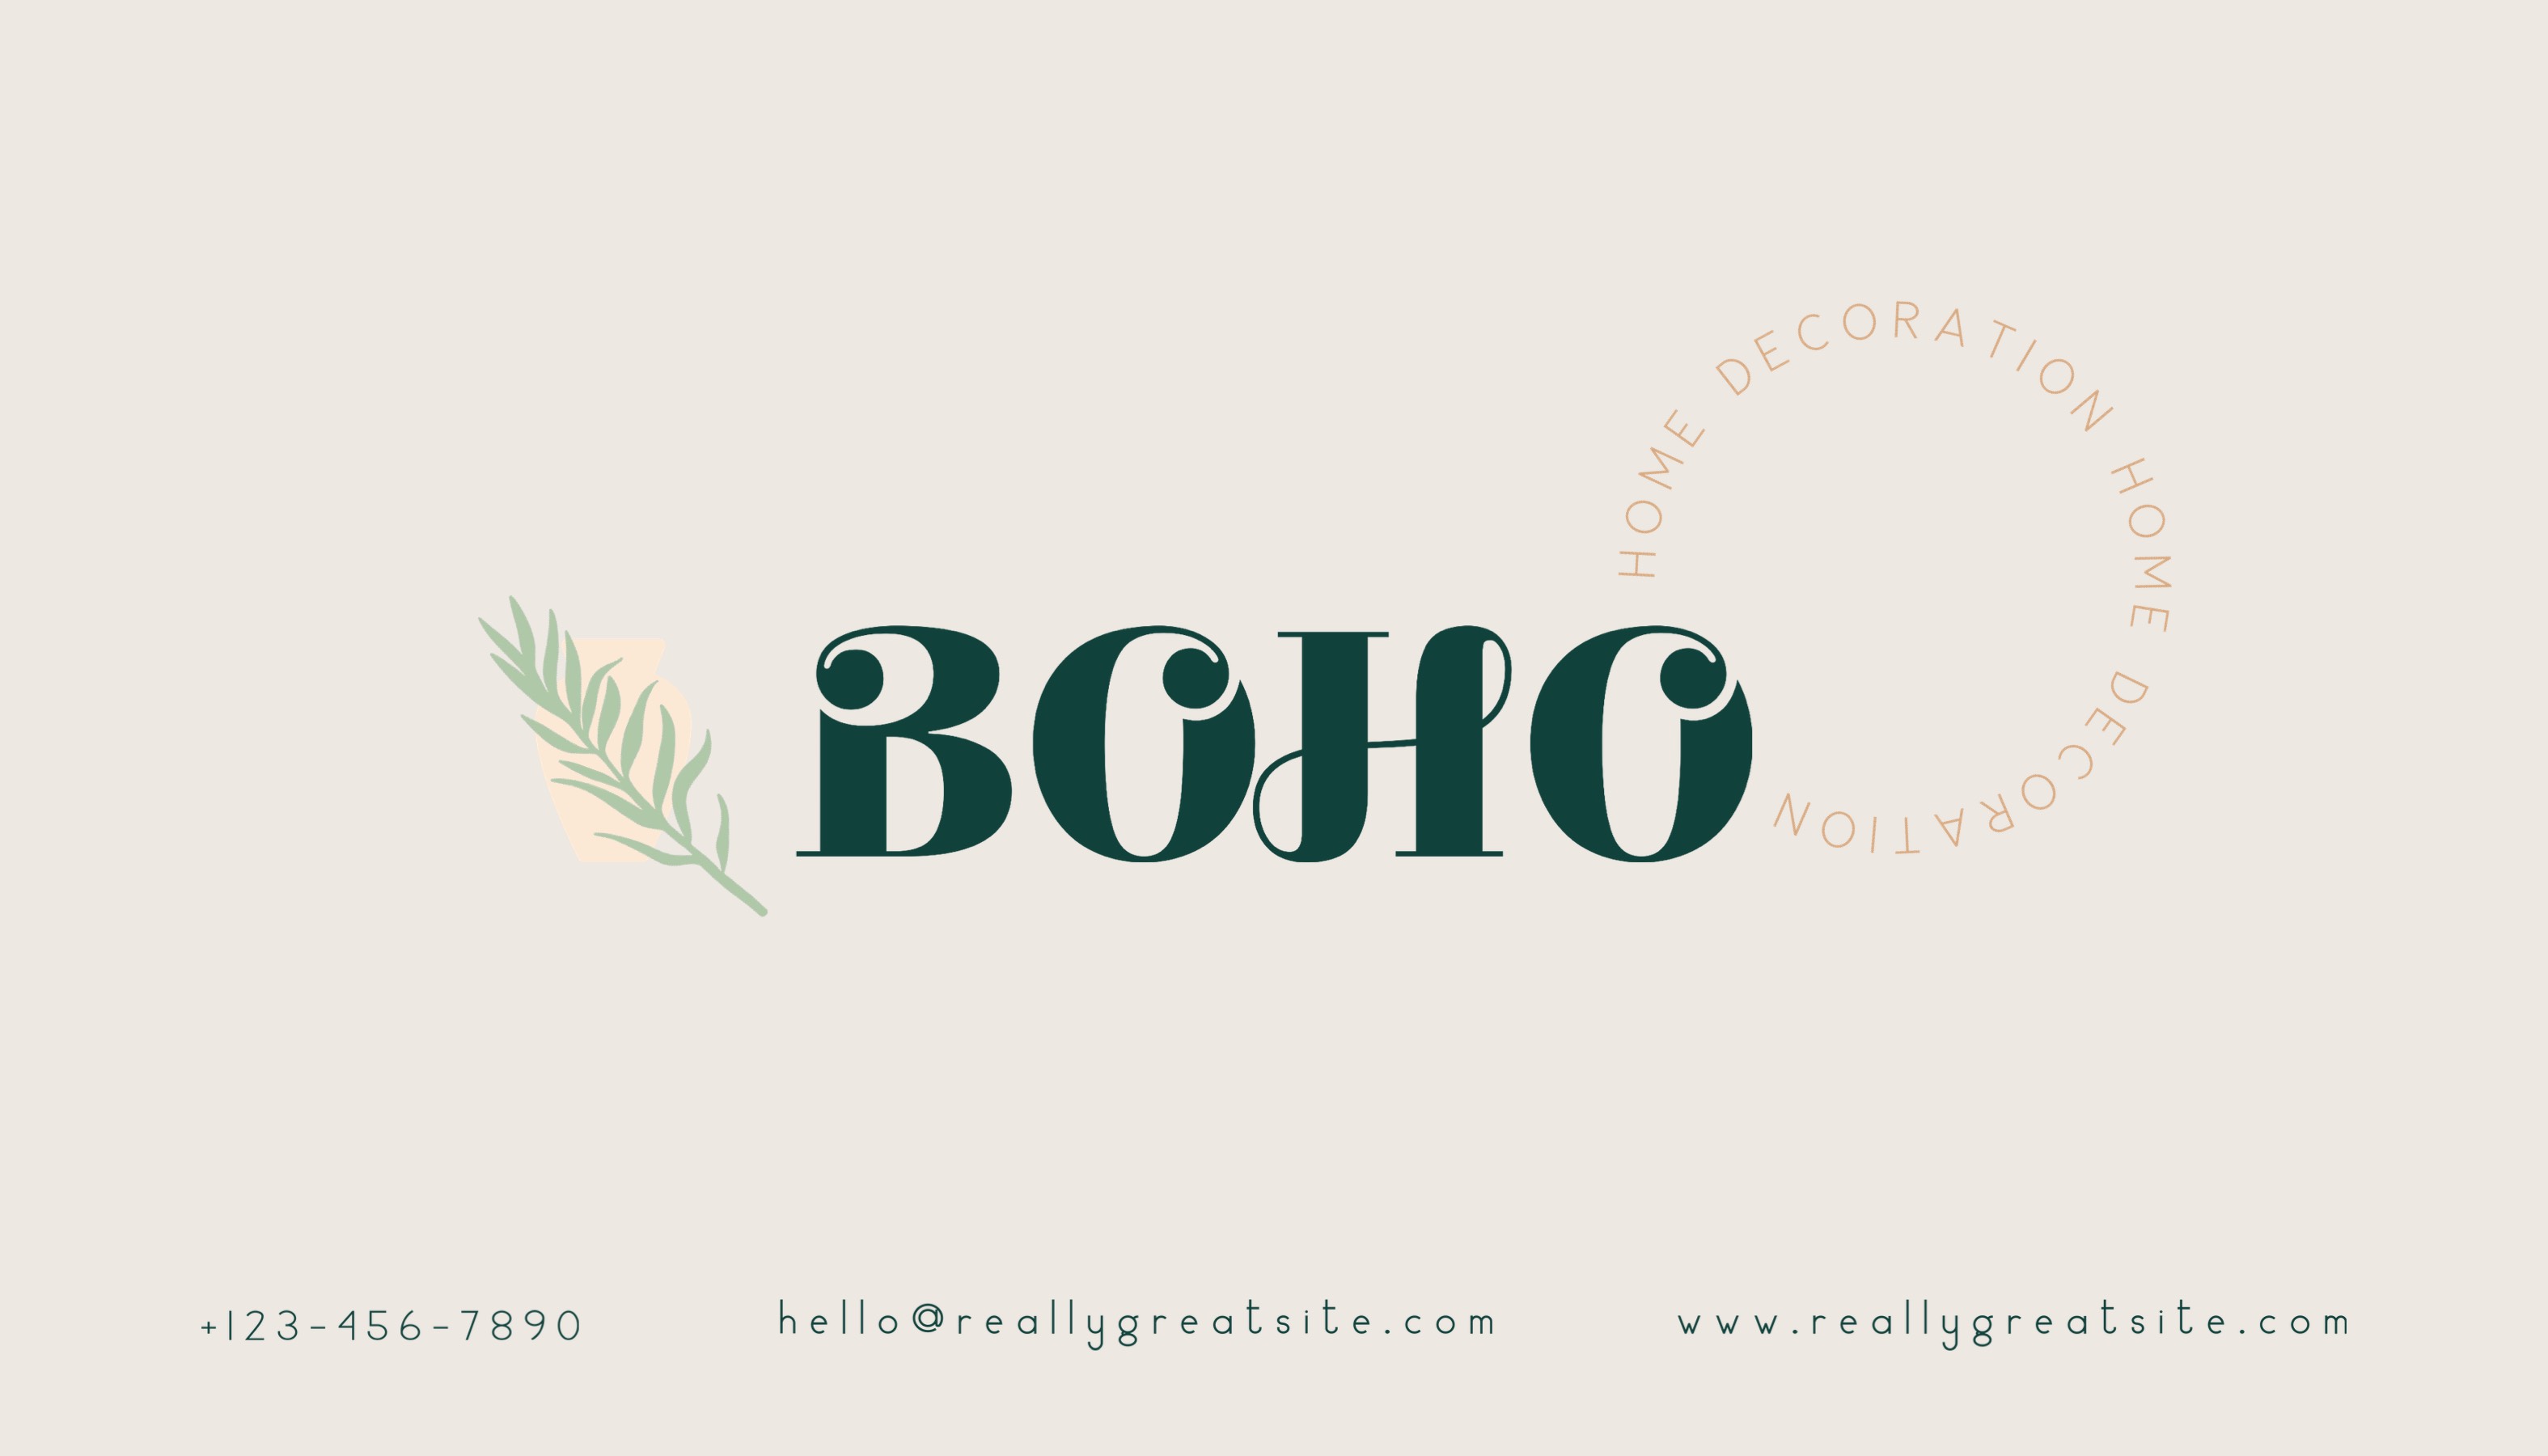 The Word Boho Written In Green Ink On A White Background Business Card Template